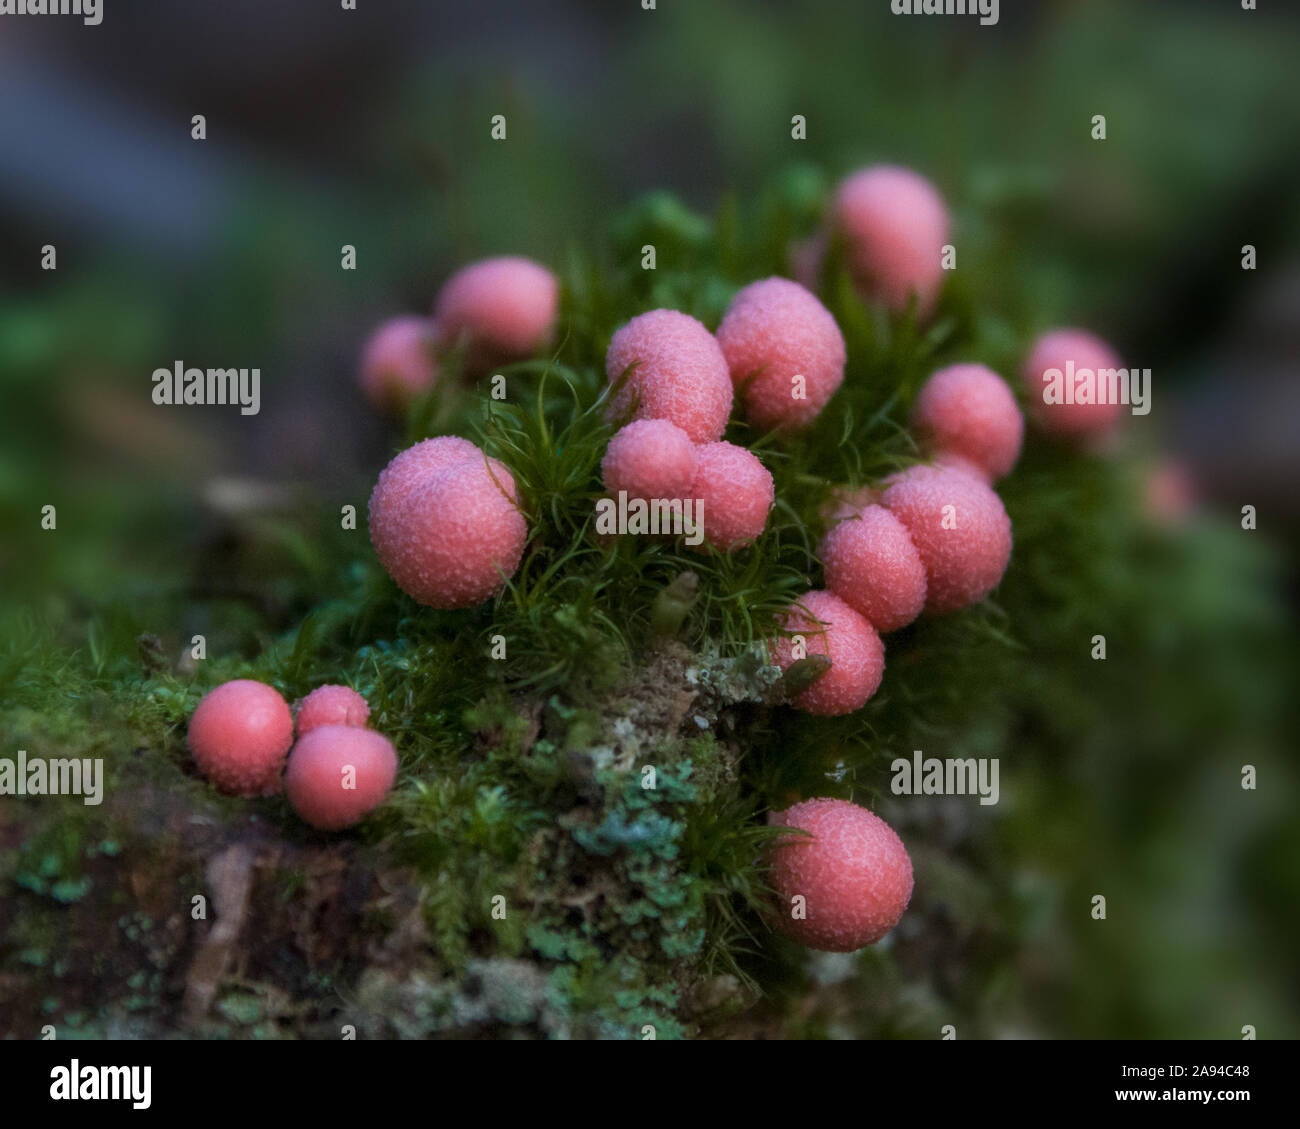 Extreme close up of Pink Slime Puffballs mushrooms in green moss on tree stump Stock Photo